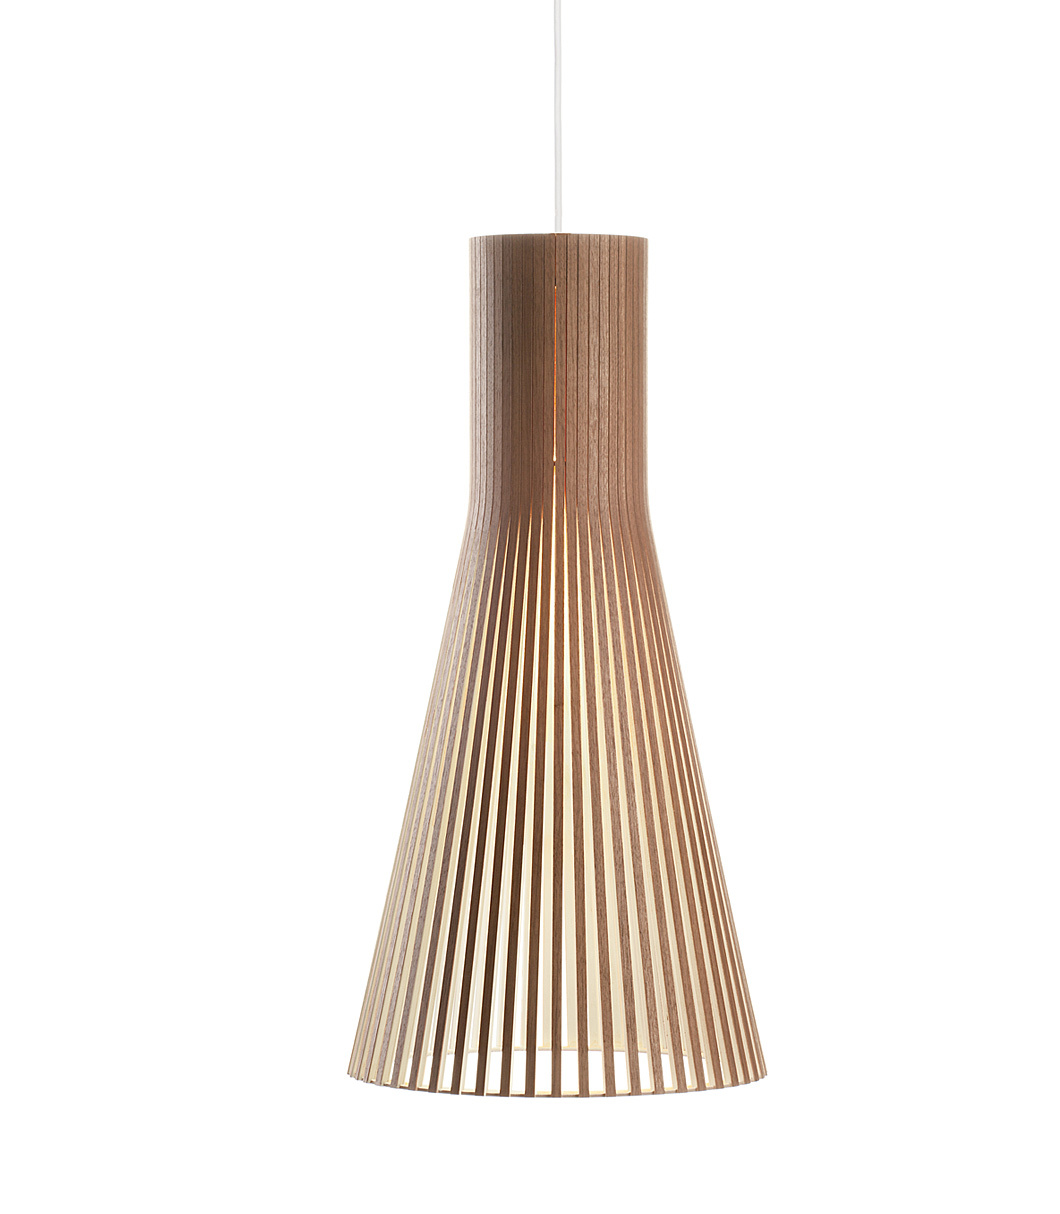 Secto 4200 pendant lamp is available in walnut veneer